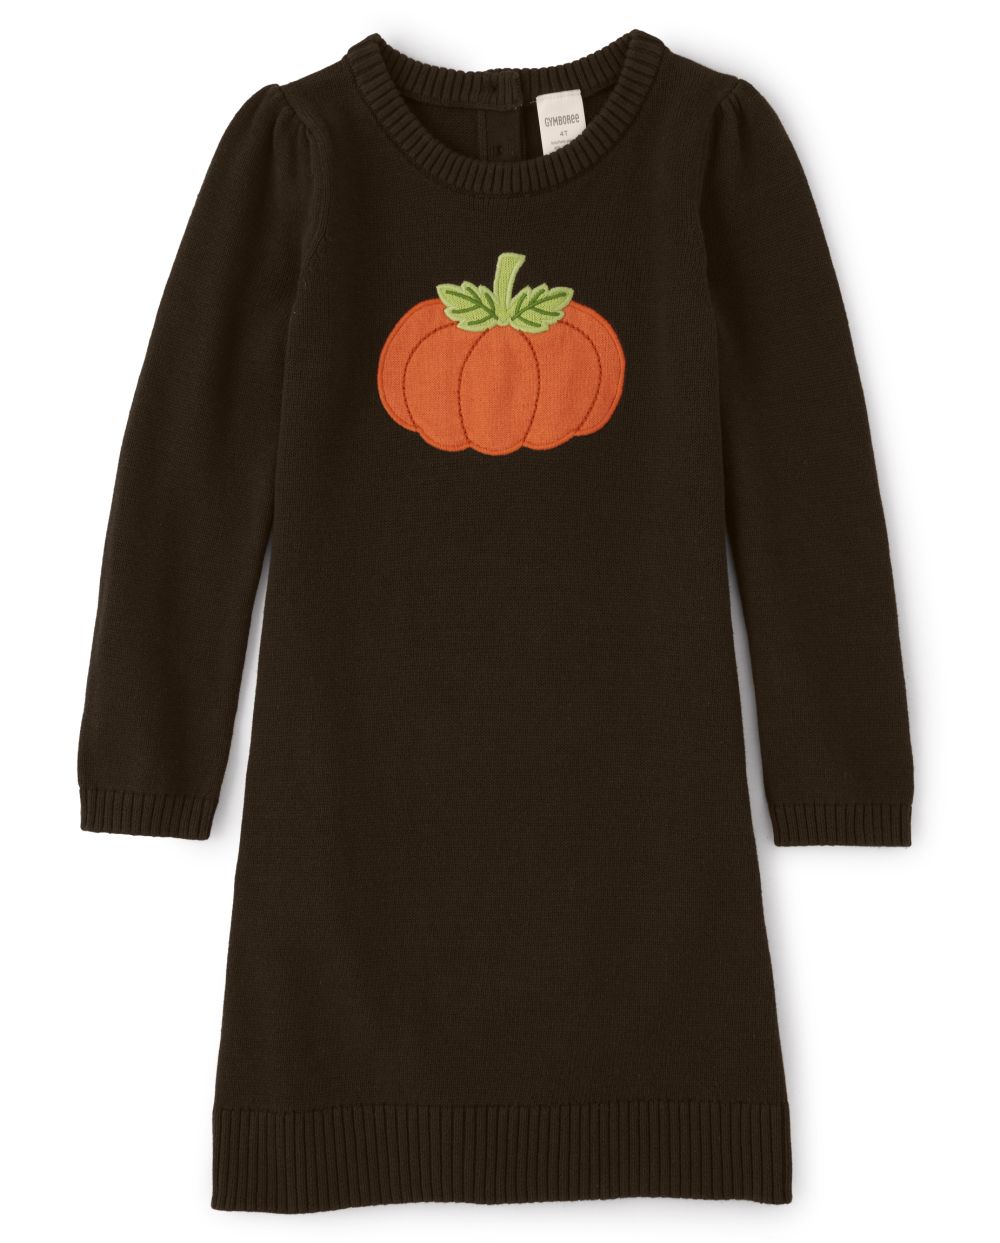 matching sibling fall outfits, brown sweater dress with an orange pumpkin in the center